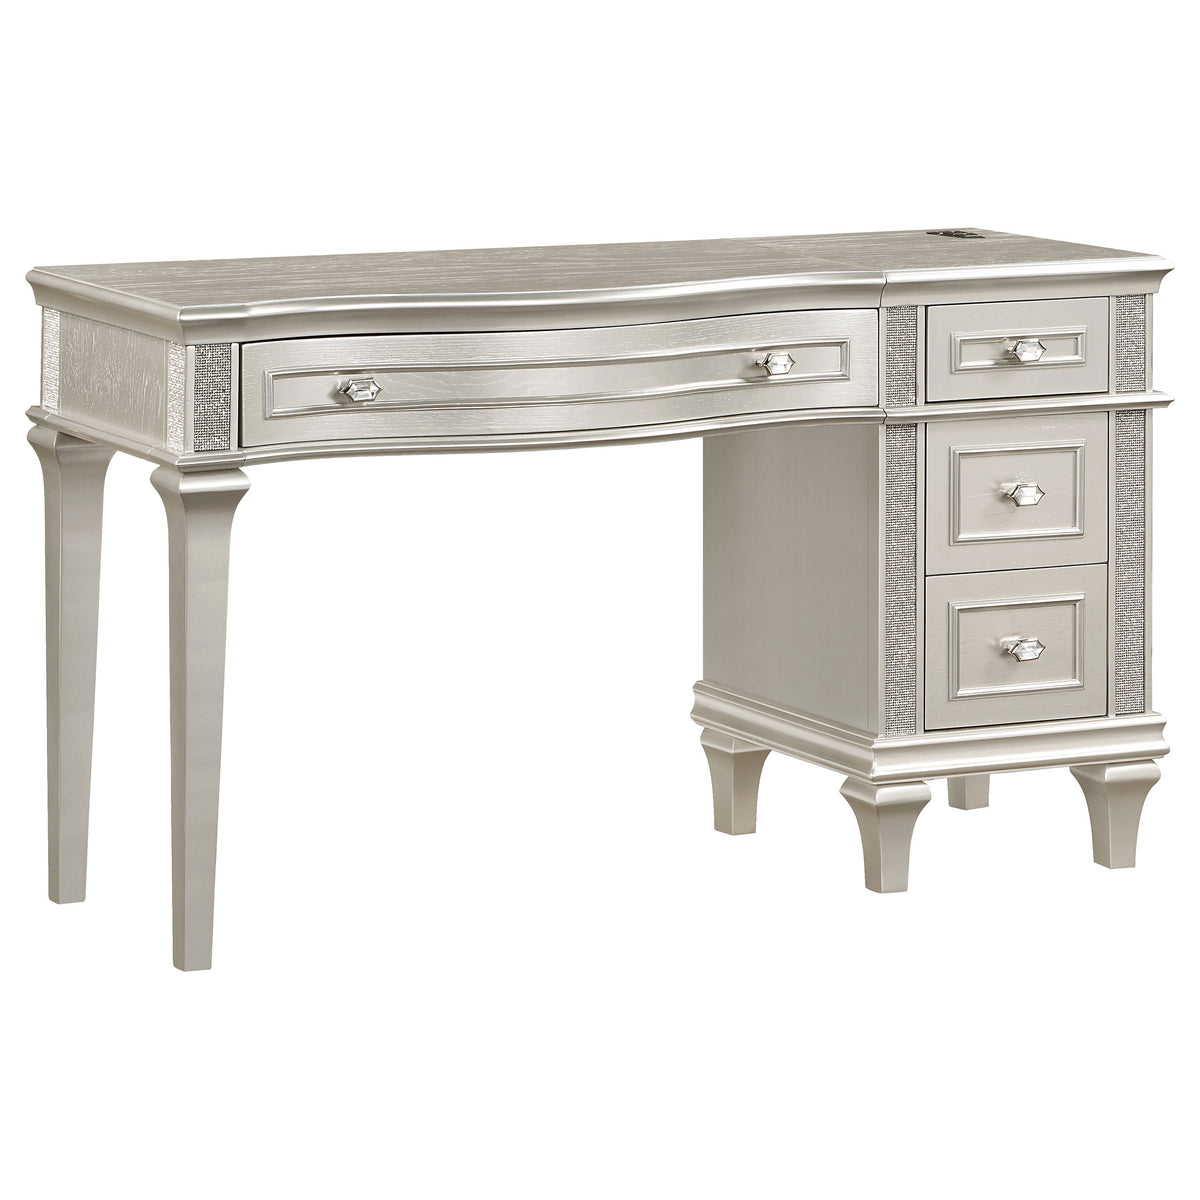 Evangeline 4-drawer Vanity Table with Faux Diamond Trim Silver and Ivory Evangeline 4-drawer Vanity Table with Faux Diamond Trim Silver and Ivory Half Price Furniture